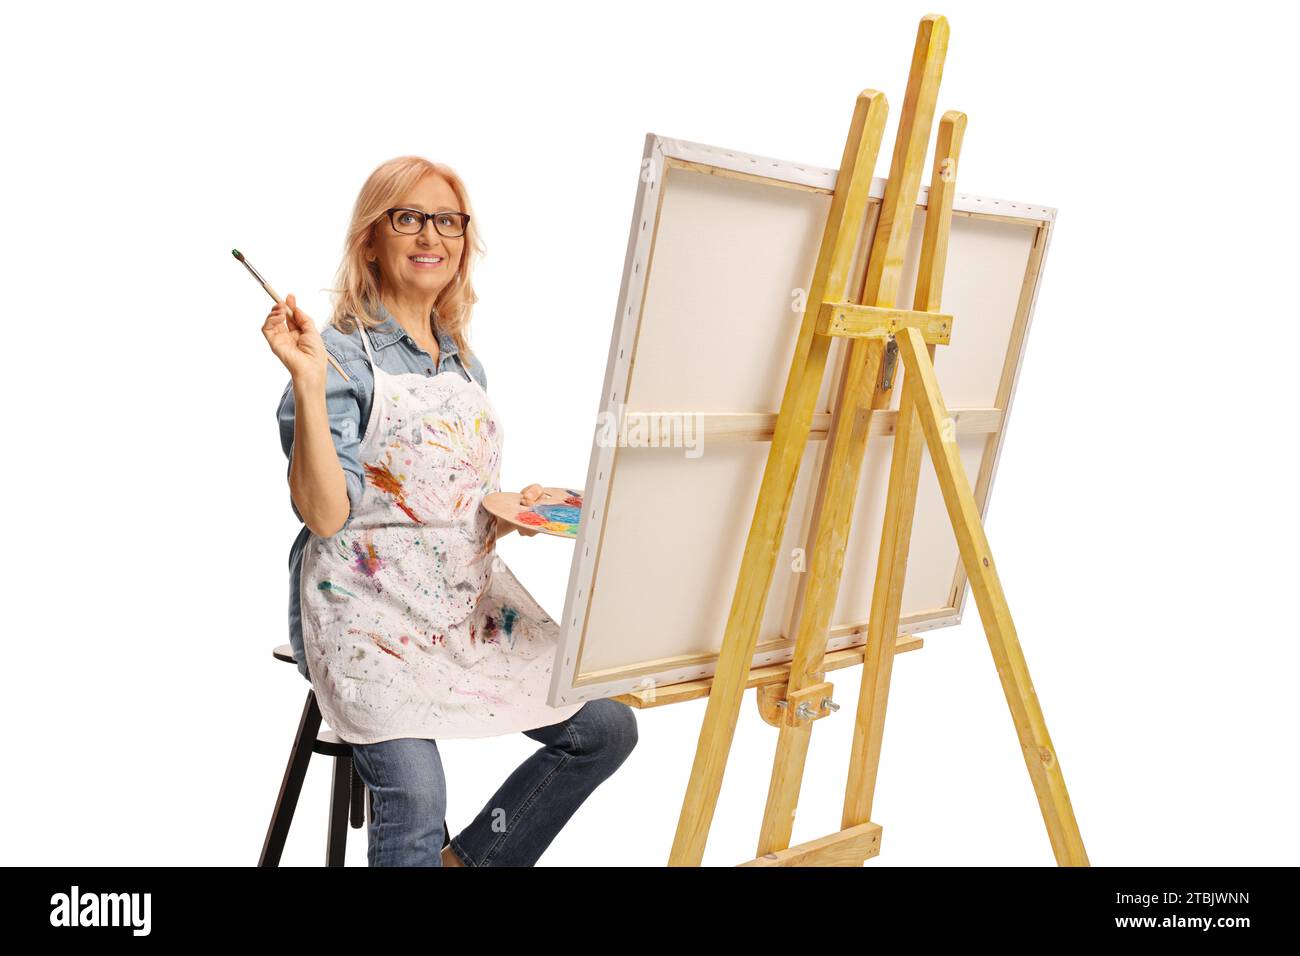 Middle aged woman sitting on a chair and painting on a canvas, hobbies and leisure concept Stock Photo